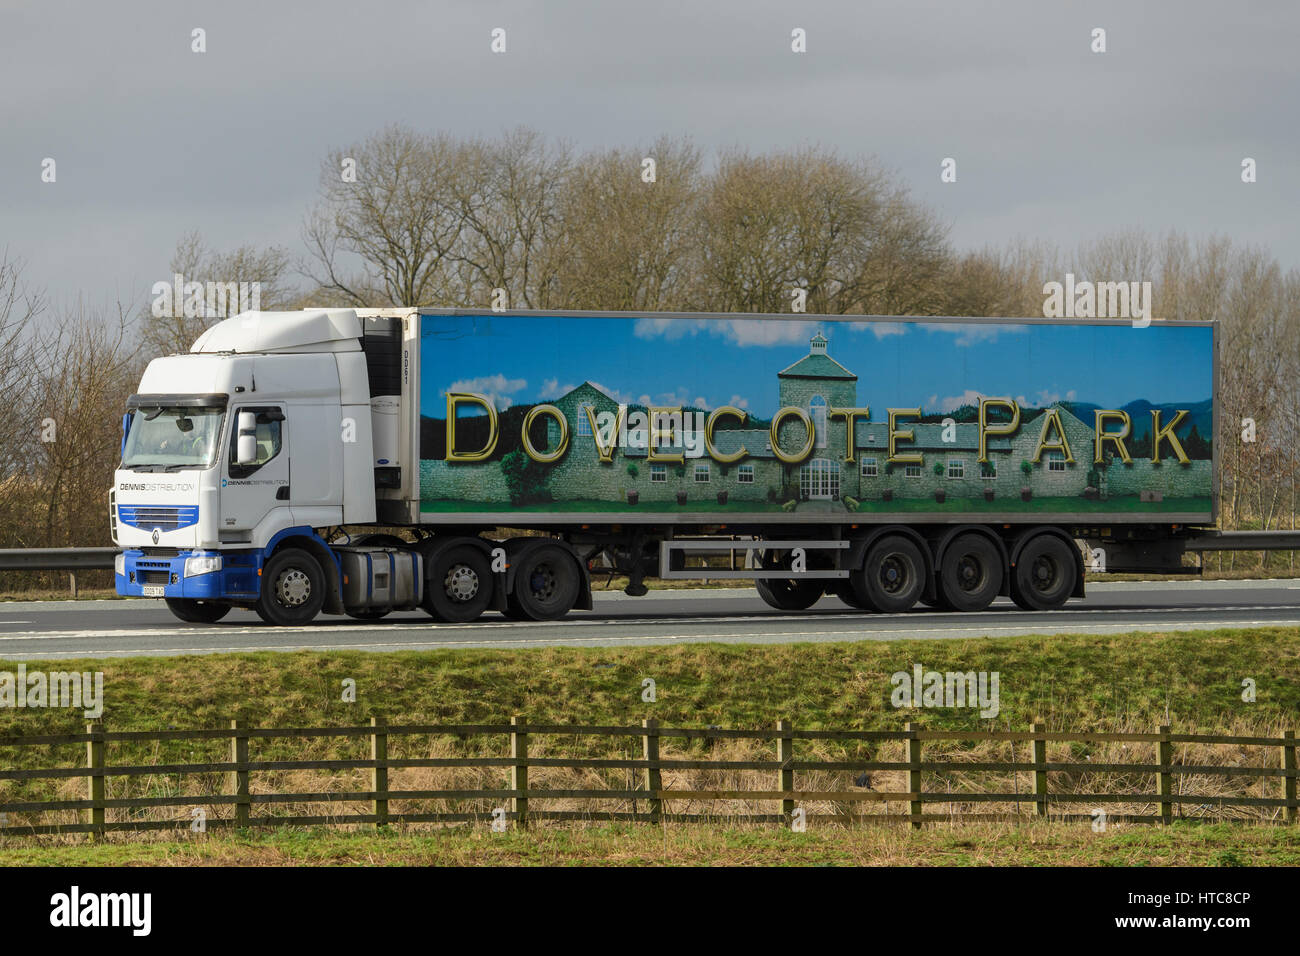 Distribution & transportation - articulated lorry, heavy goods vehicle (HGV) with Dovecote Park logo travelling on the A1 motorway - England, GB, UK. Stock Photo